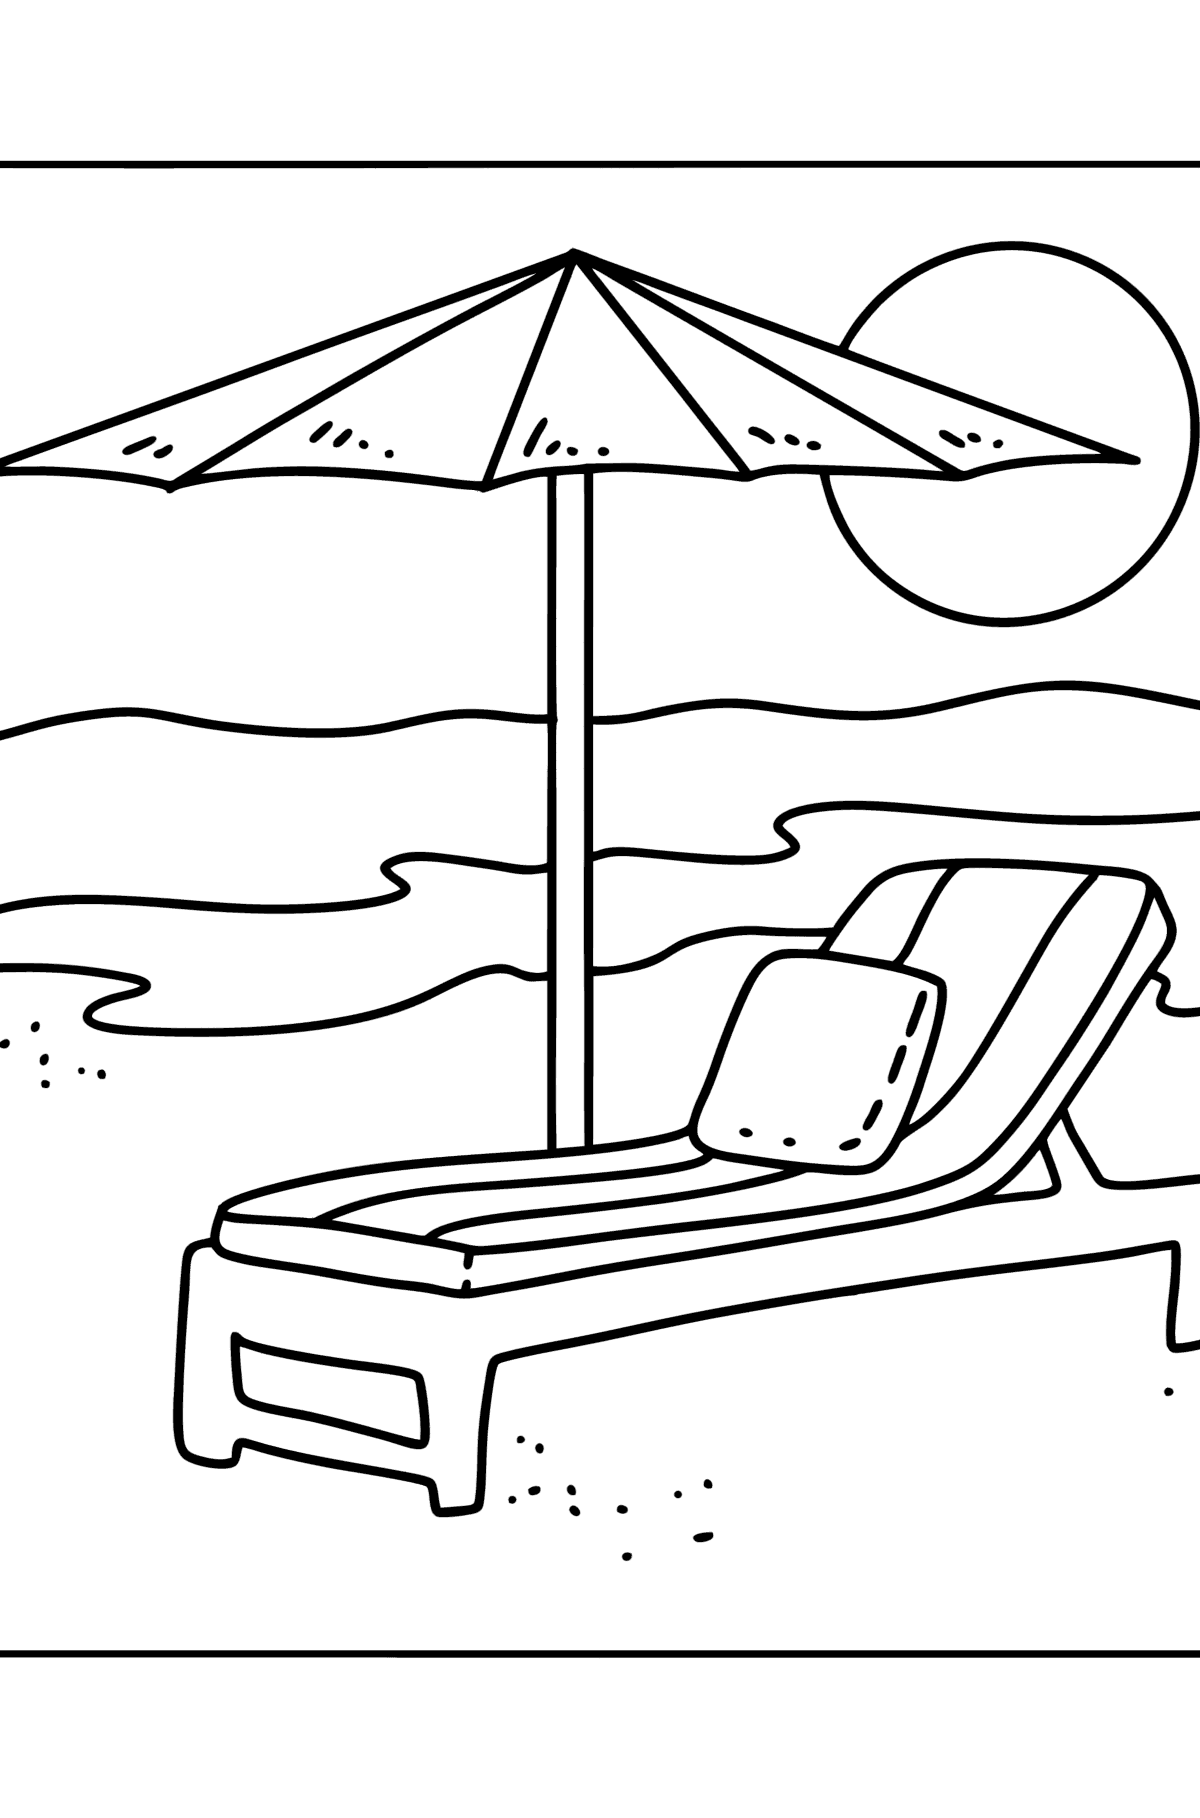 Summer Coloring page - Beach umbrella and Sun lounger - Coloring Pages for Kids